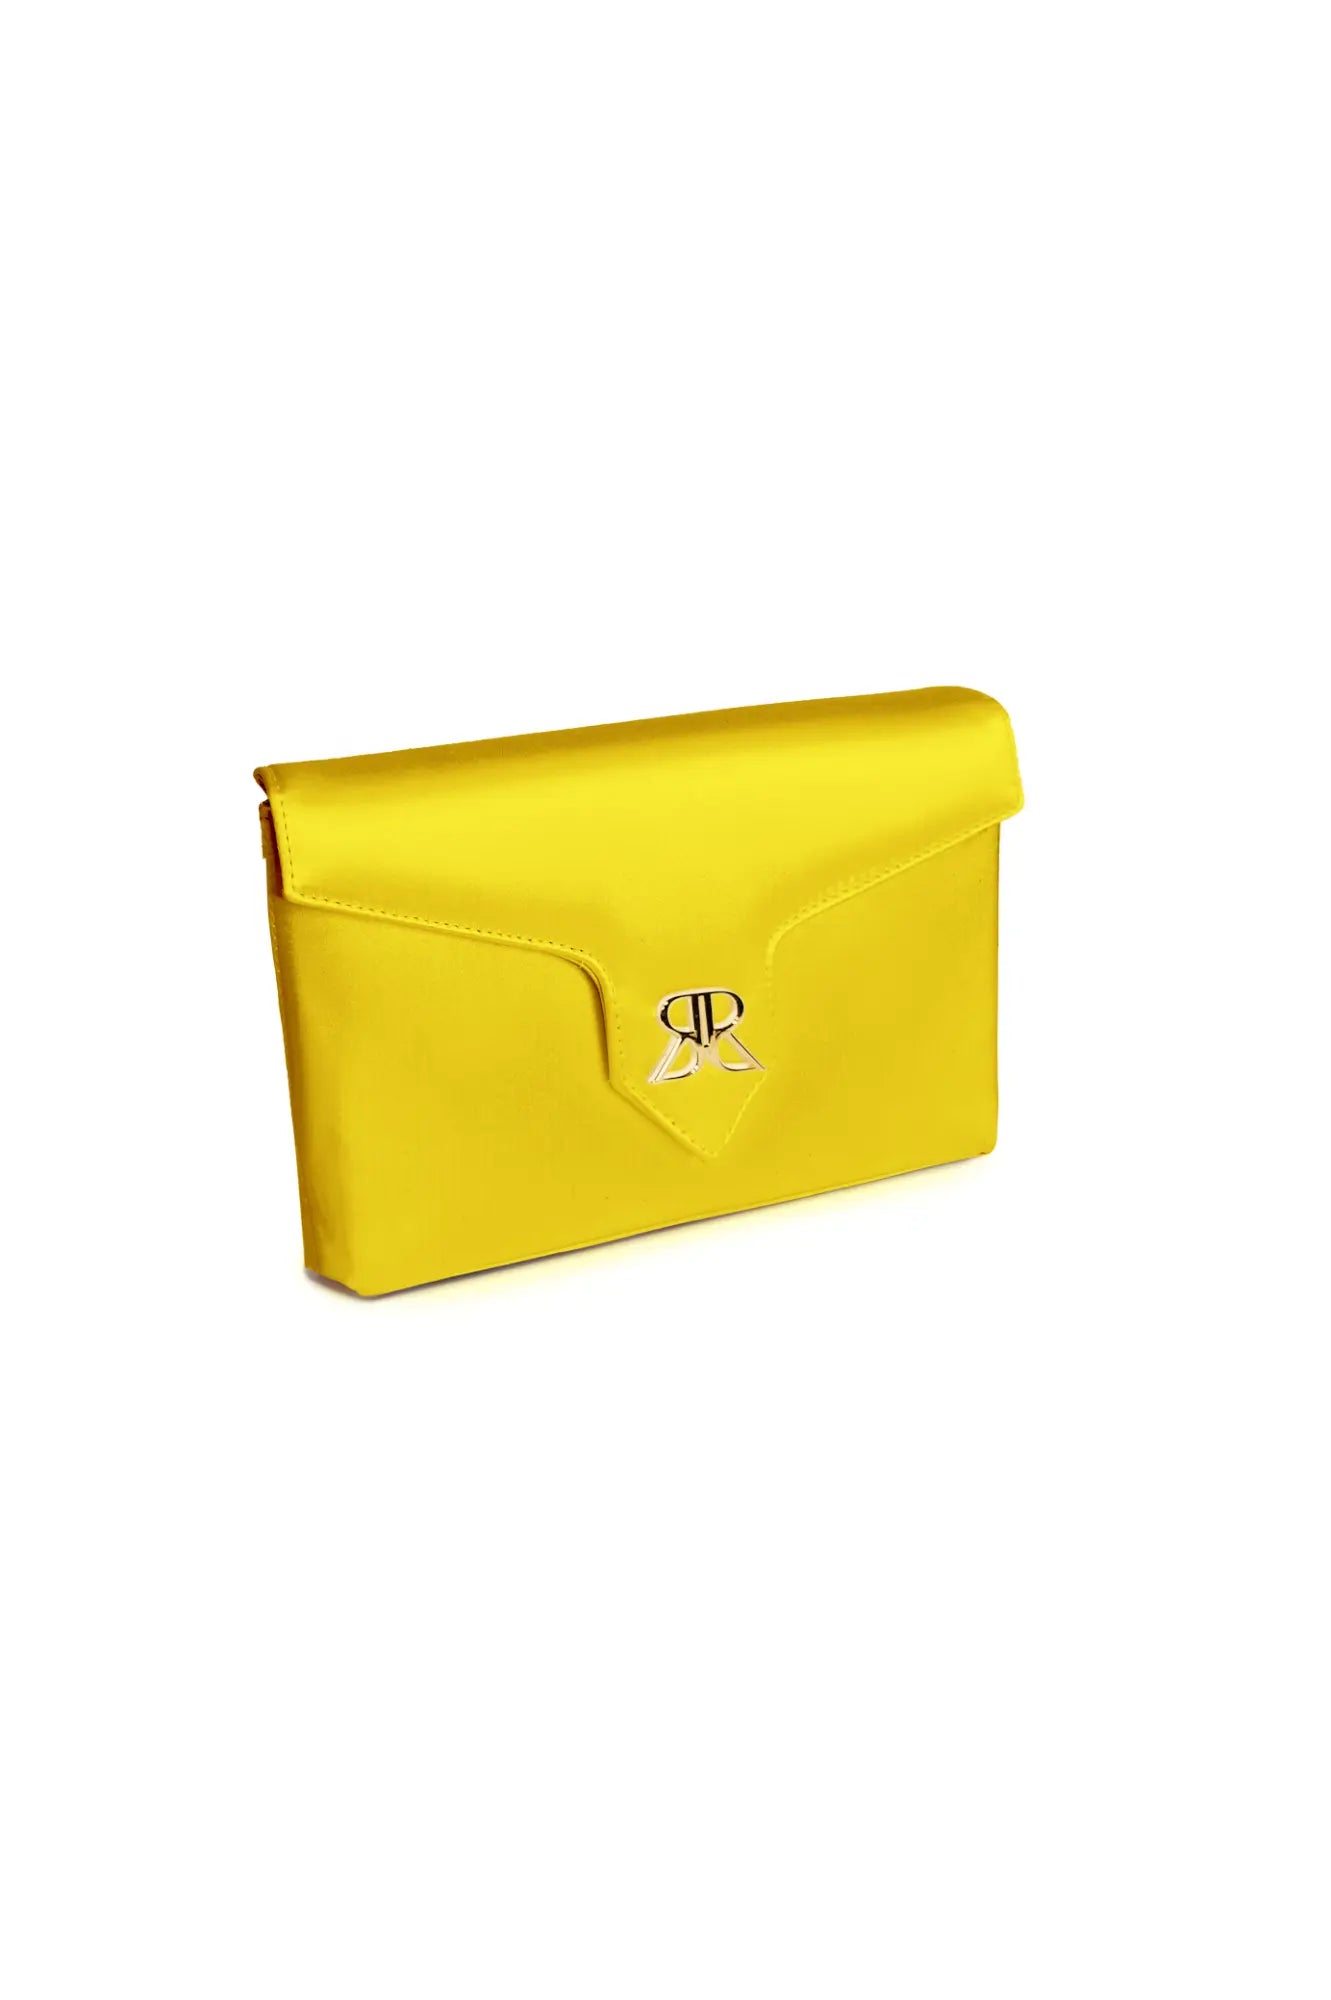 Love Note Envelope Clutch Limoncello Yellow by The Bella Rosa Collection with a metallic clasp on a white background.